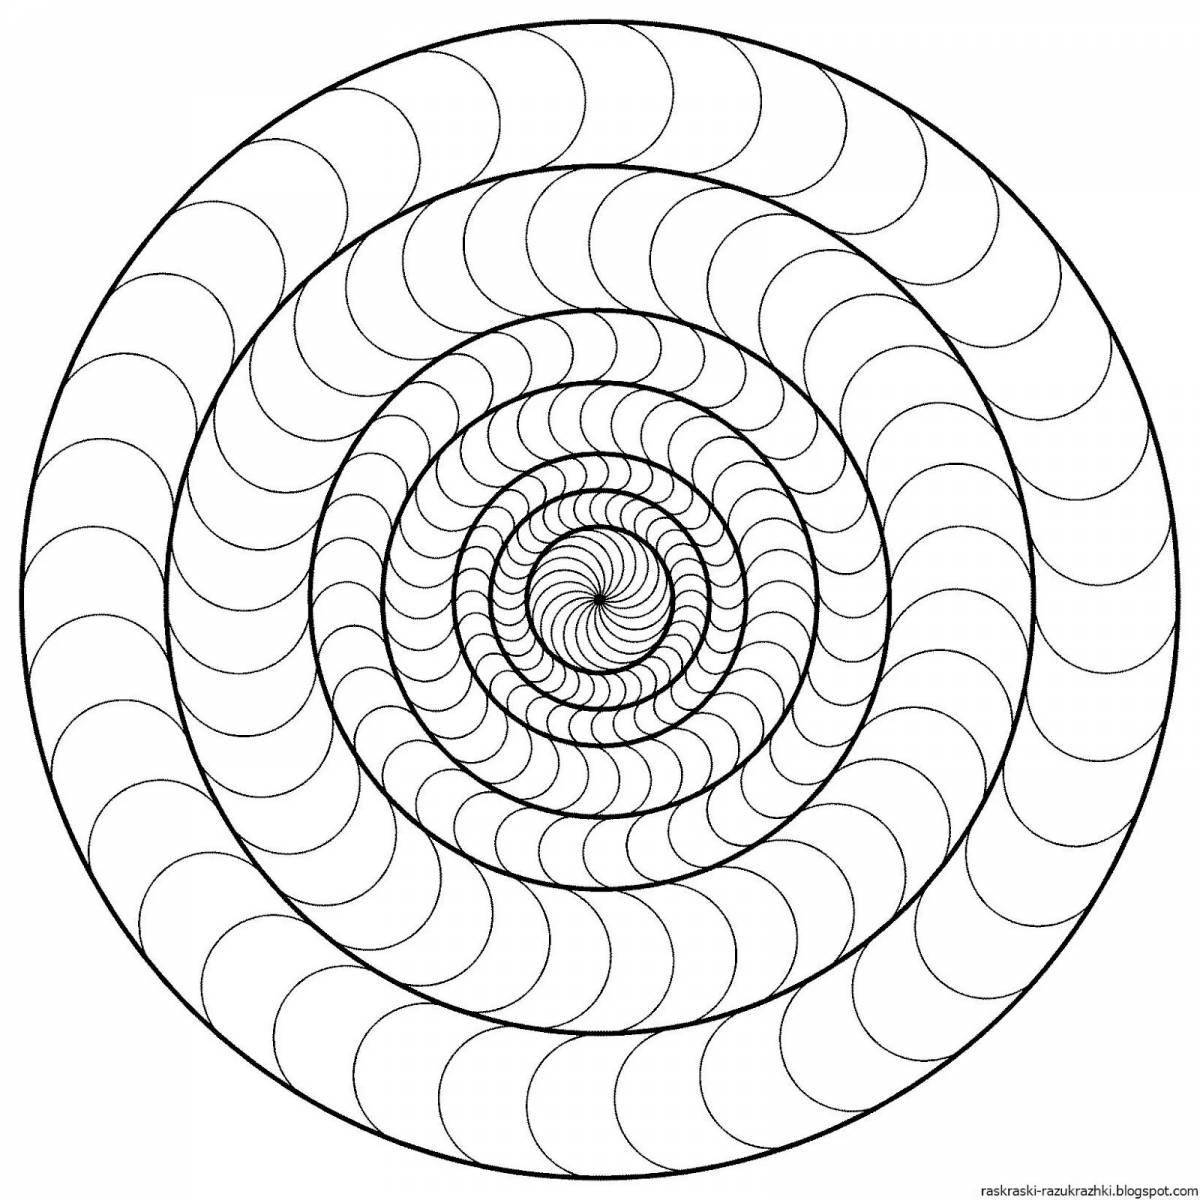 Amazing round lines create a coloring page